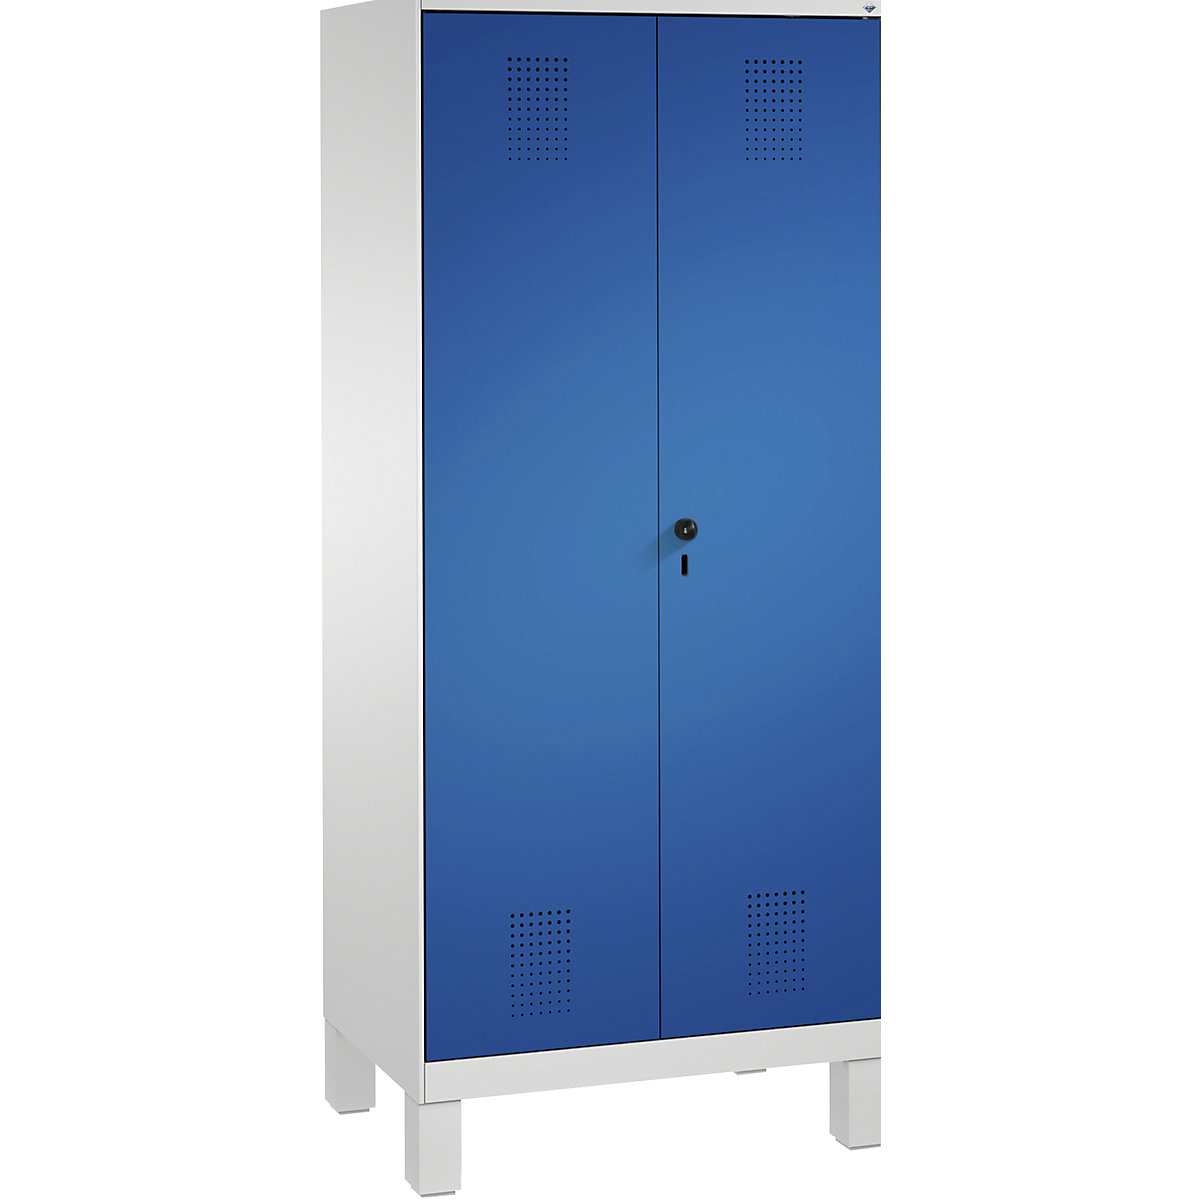 EVOLO storage cupboard, doors close in the middle, with feet – C+P, 2 compartments, 8 shelves, compartment width 400 mm, light grey / gentian blue-12